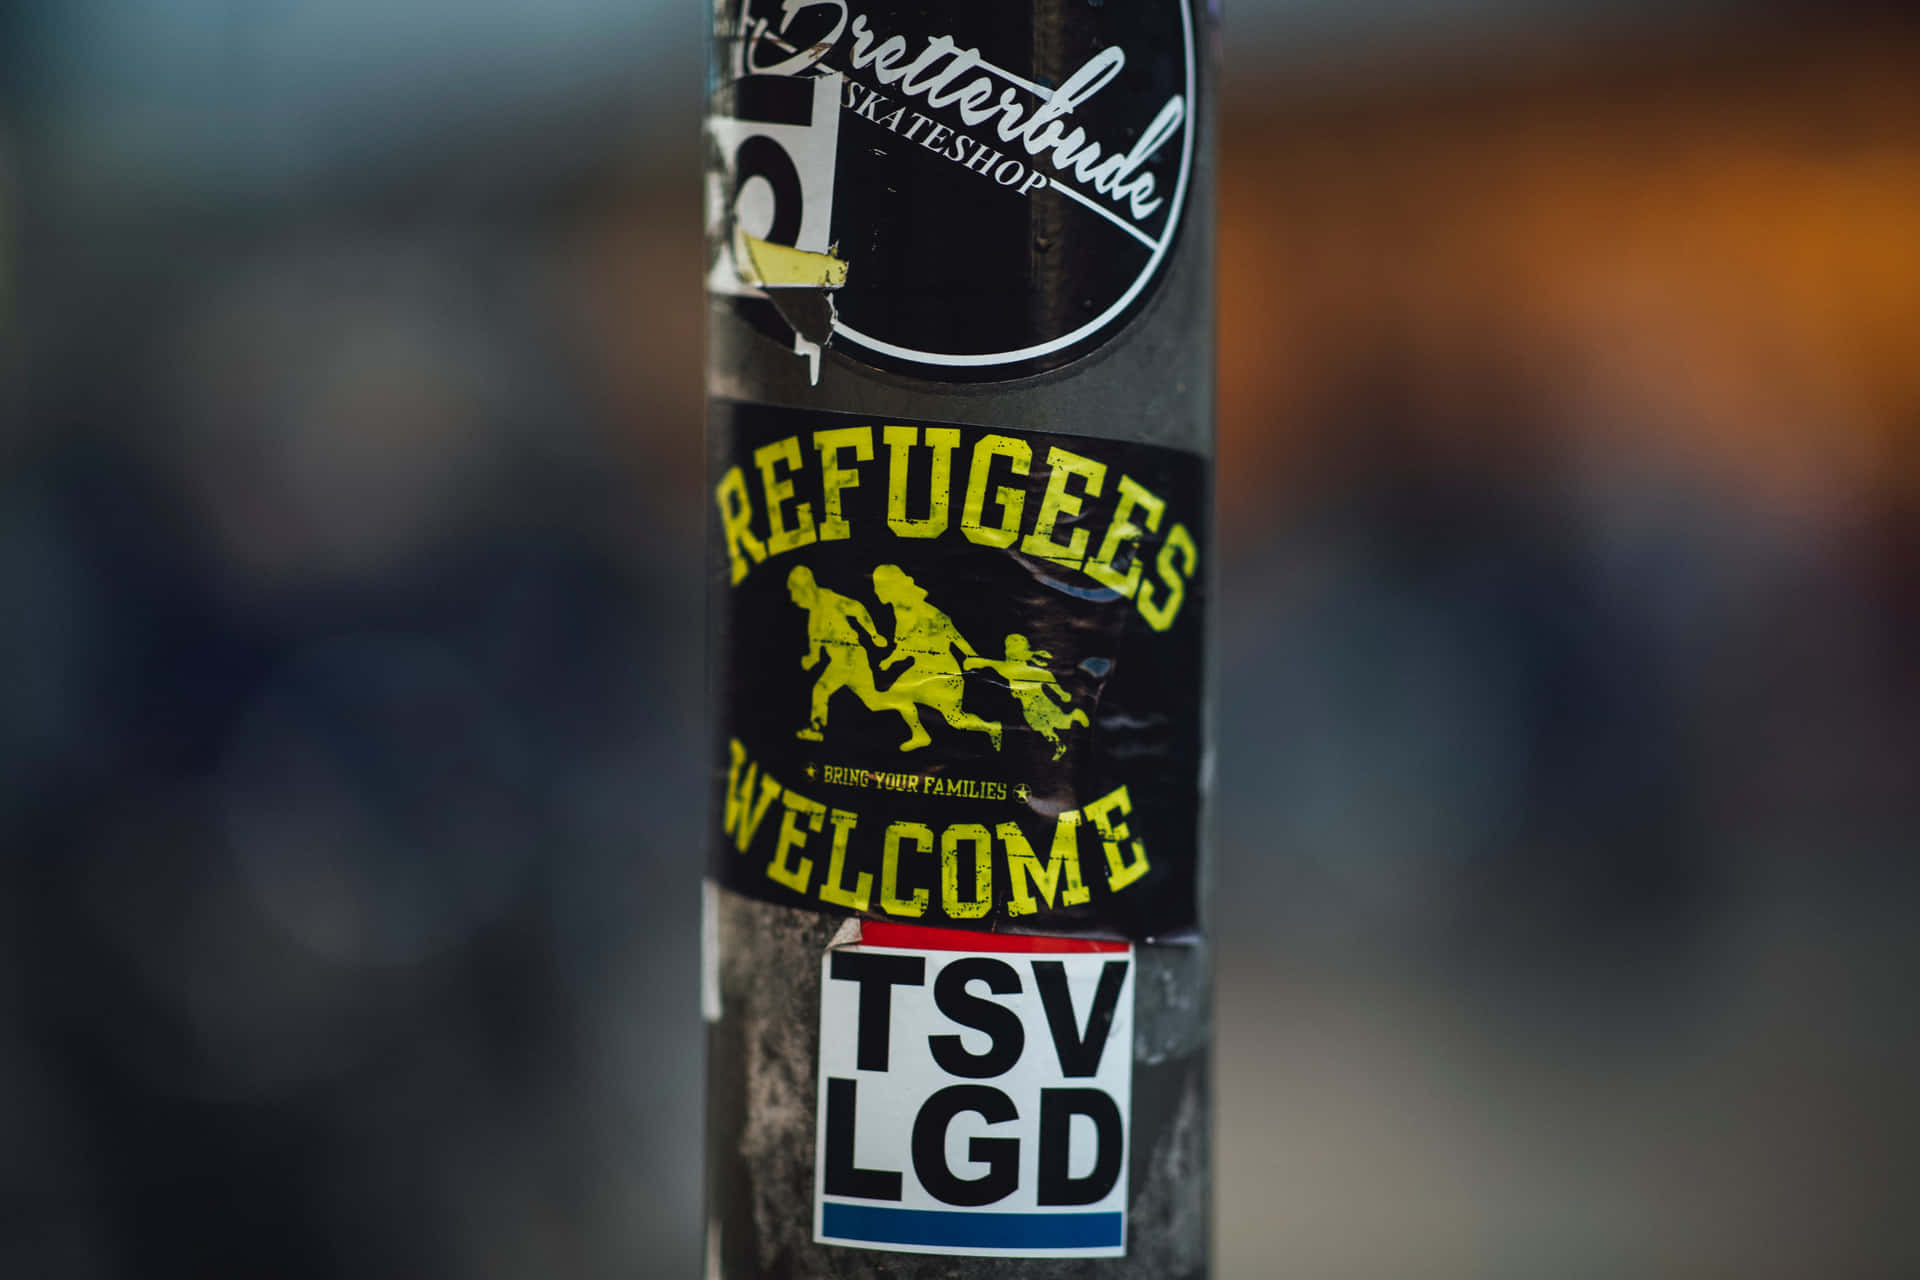 Refugees Welcome Stickers On A Pole